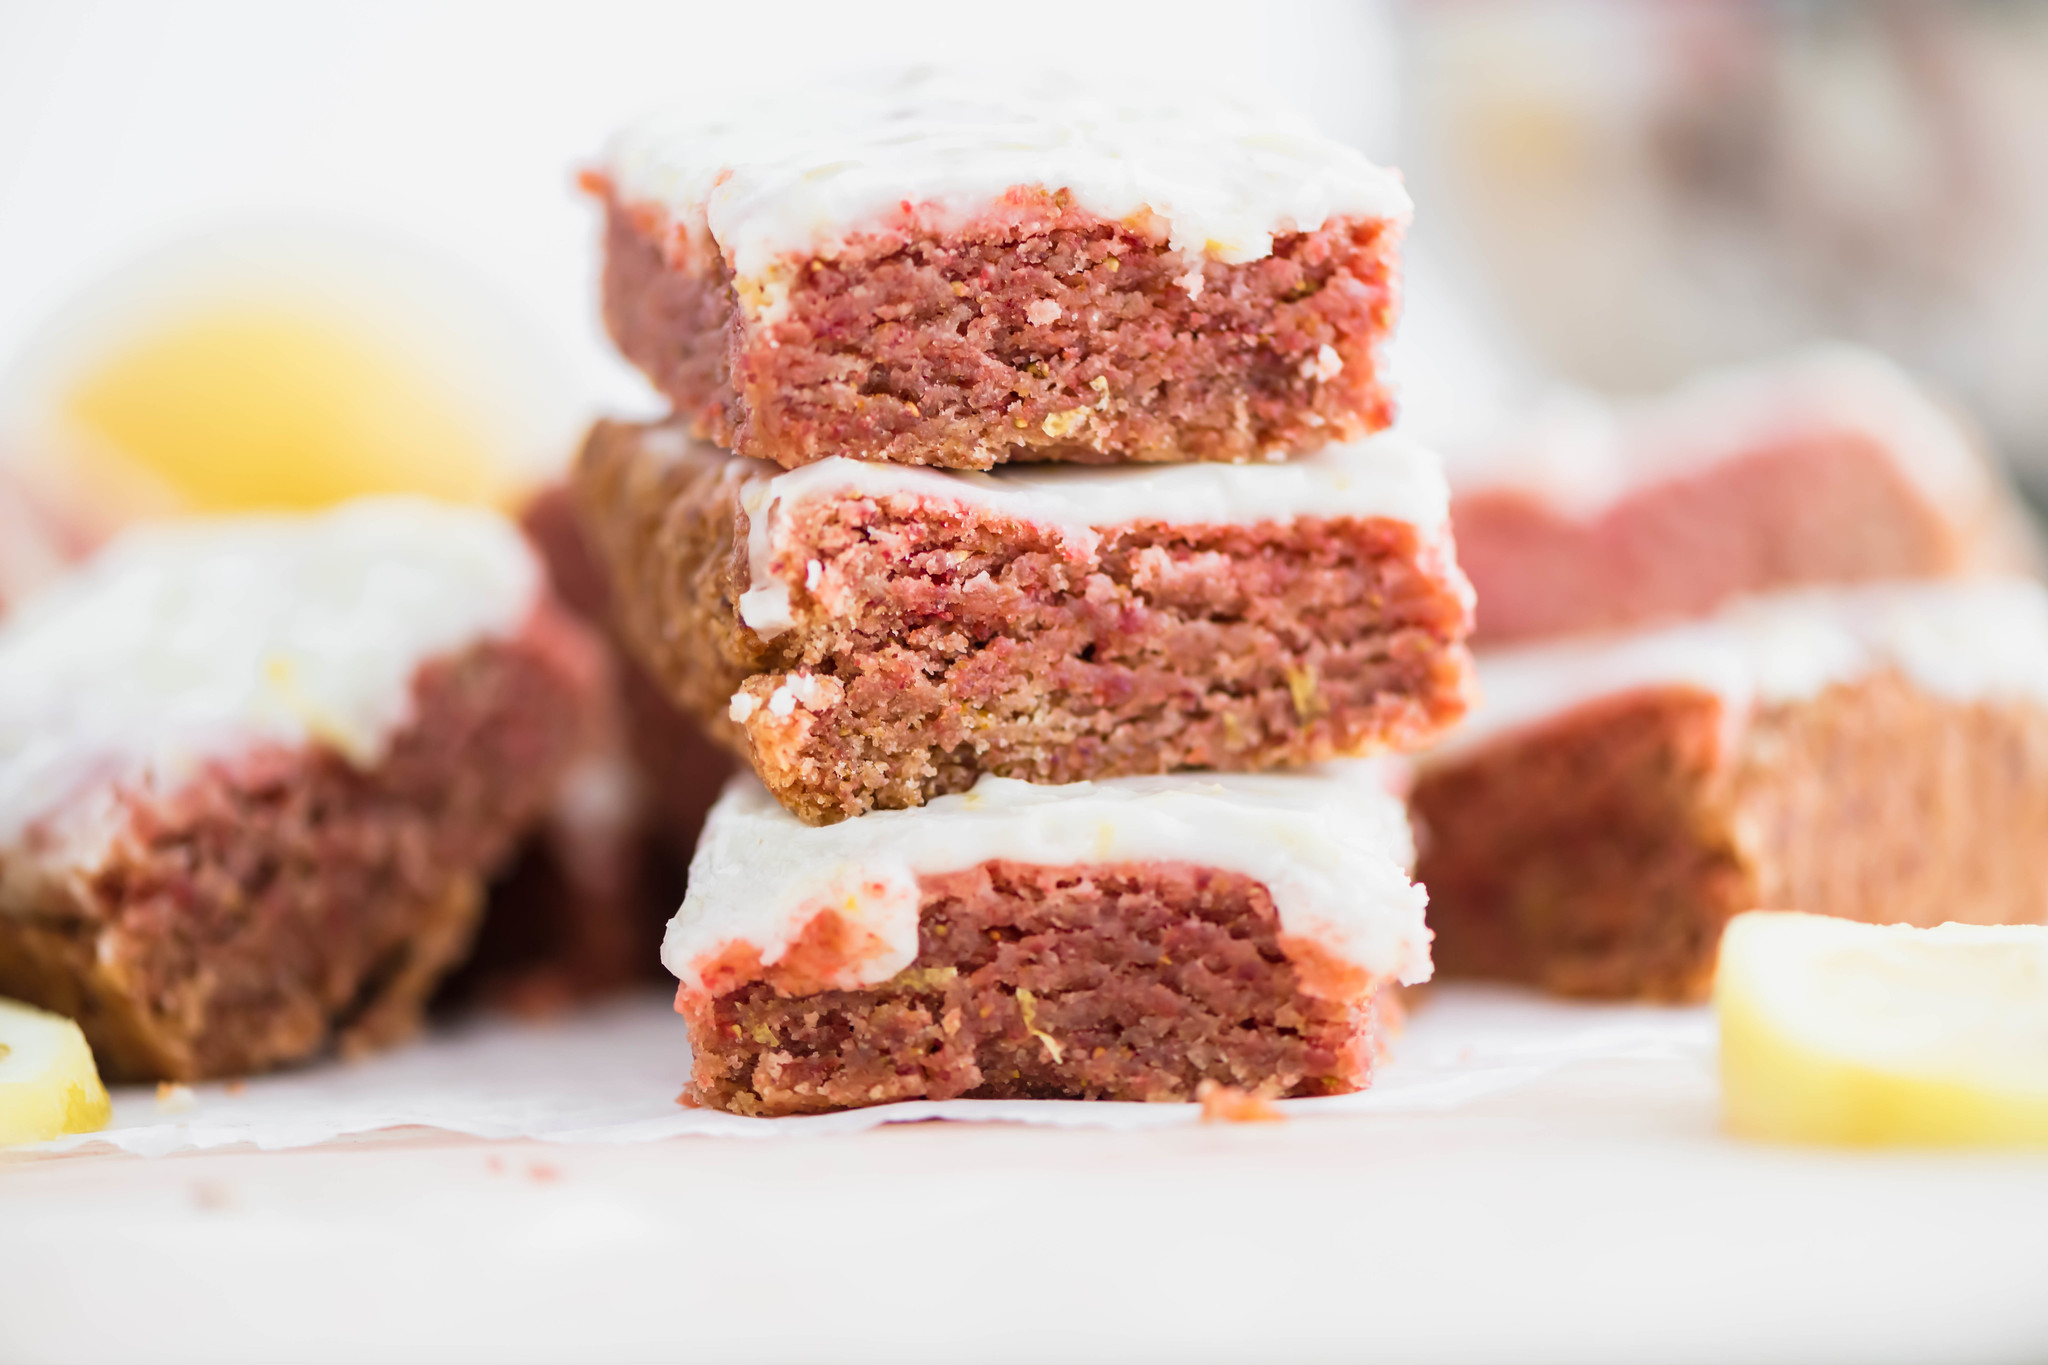 Looking for a sweet and zingy dessert perfect for spring? These Strawberry Lemonade Bars are quick to make and start with a lemon cake mix.